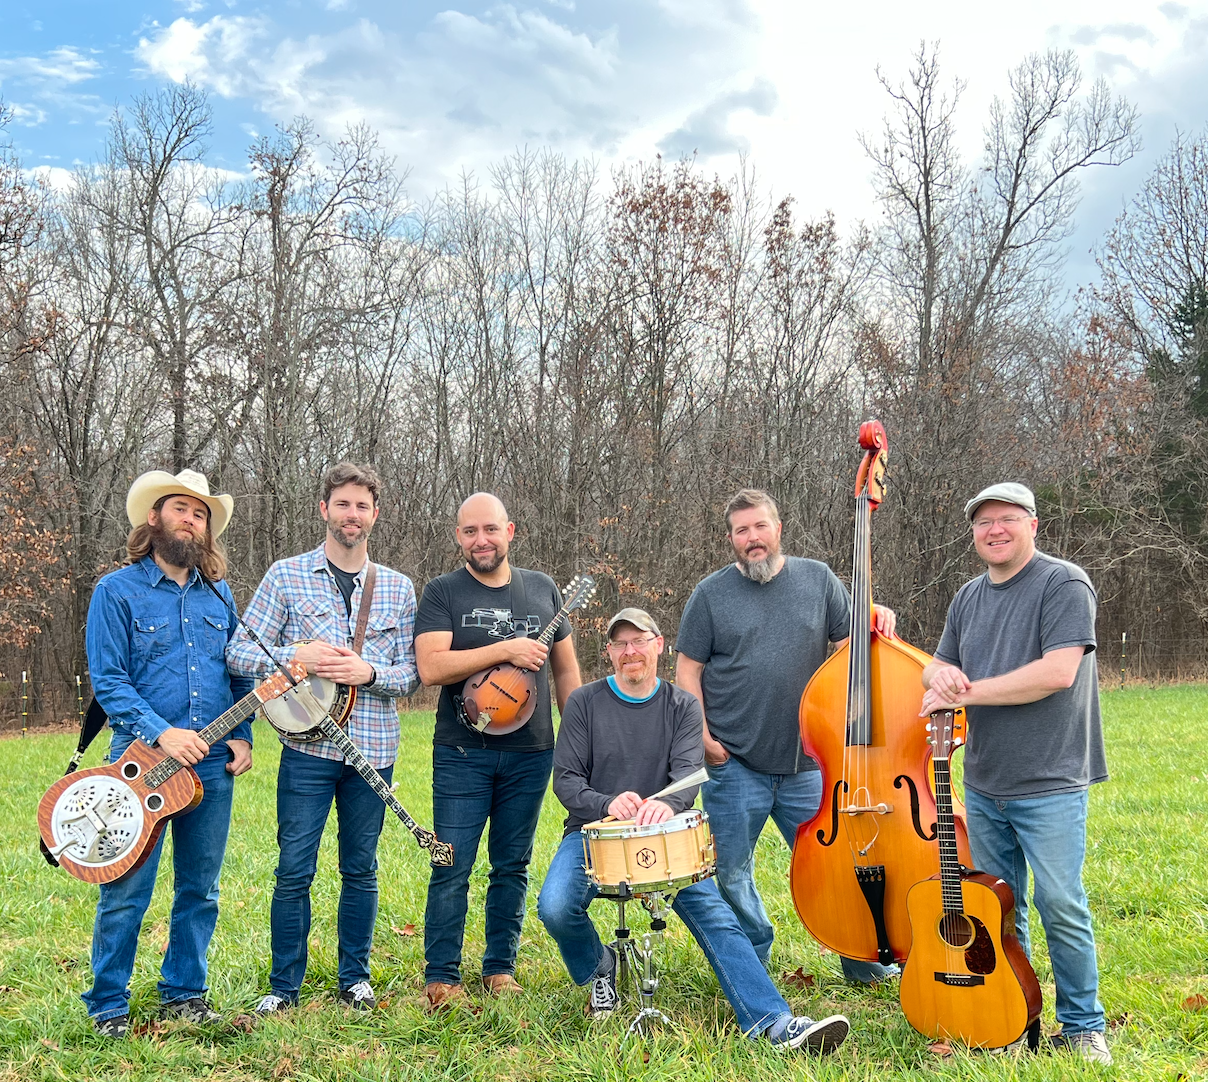 The Hillbenders, an acoustic rock and bluegrass band from Springfield, is the headlining act of Springfield's 2022 Earth Day Festival Saturday, April 23 noon to 8 p.m. at Mother's Brewing Company. In addition to The Hillbenders, eight other musical acts will perform. Springfield Aerial Fitness will also be performing throughout the entire festival. The Earth Day Festival is hosted by the non-profit Earth Day Springfield Festival.